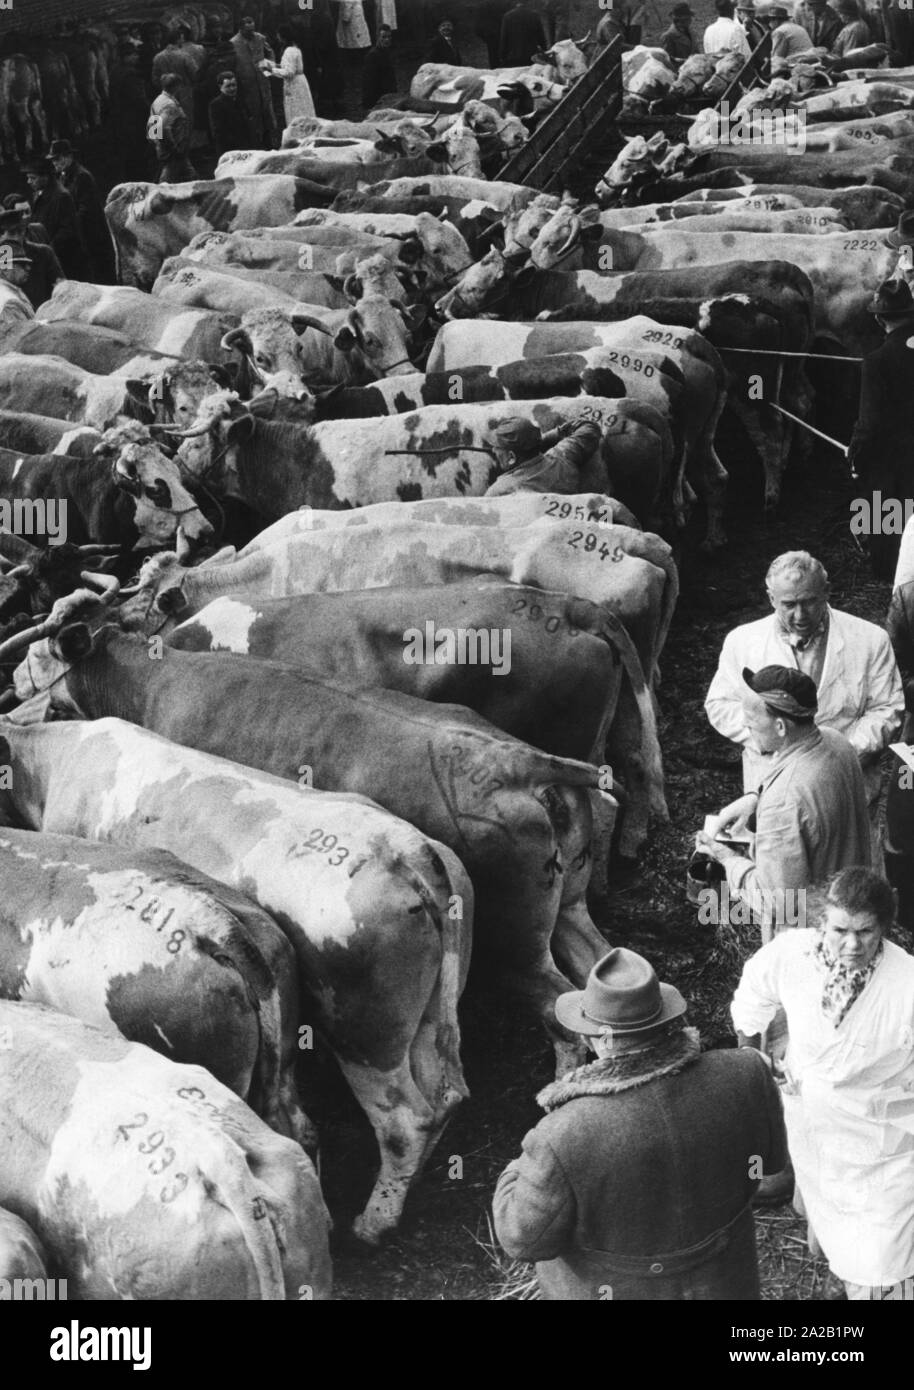 Cattle are sold on a livestock market (undated photo). Stock Photo